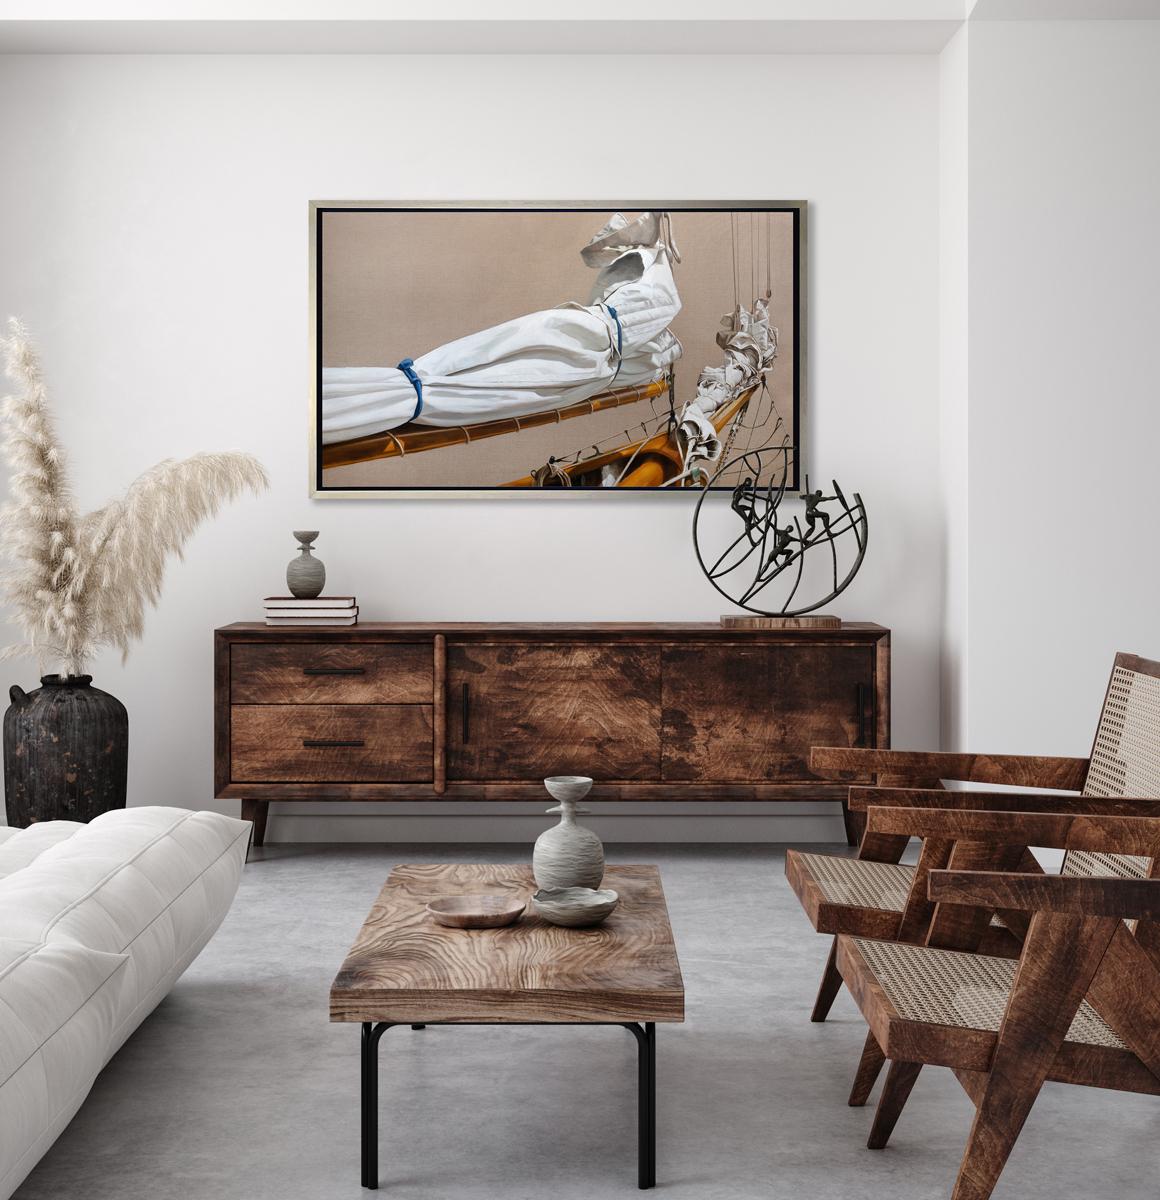 This realistic nautical limited edition print by Michel Brosseau captures the folded and tied white sails of a boat. The subject is rendered realistically with a flat, light, raw-linen colored background. 

This Limited Edition giclee print is an